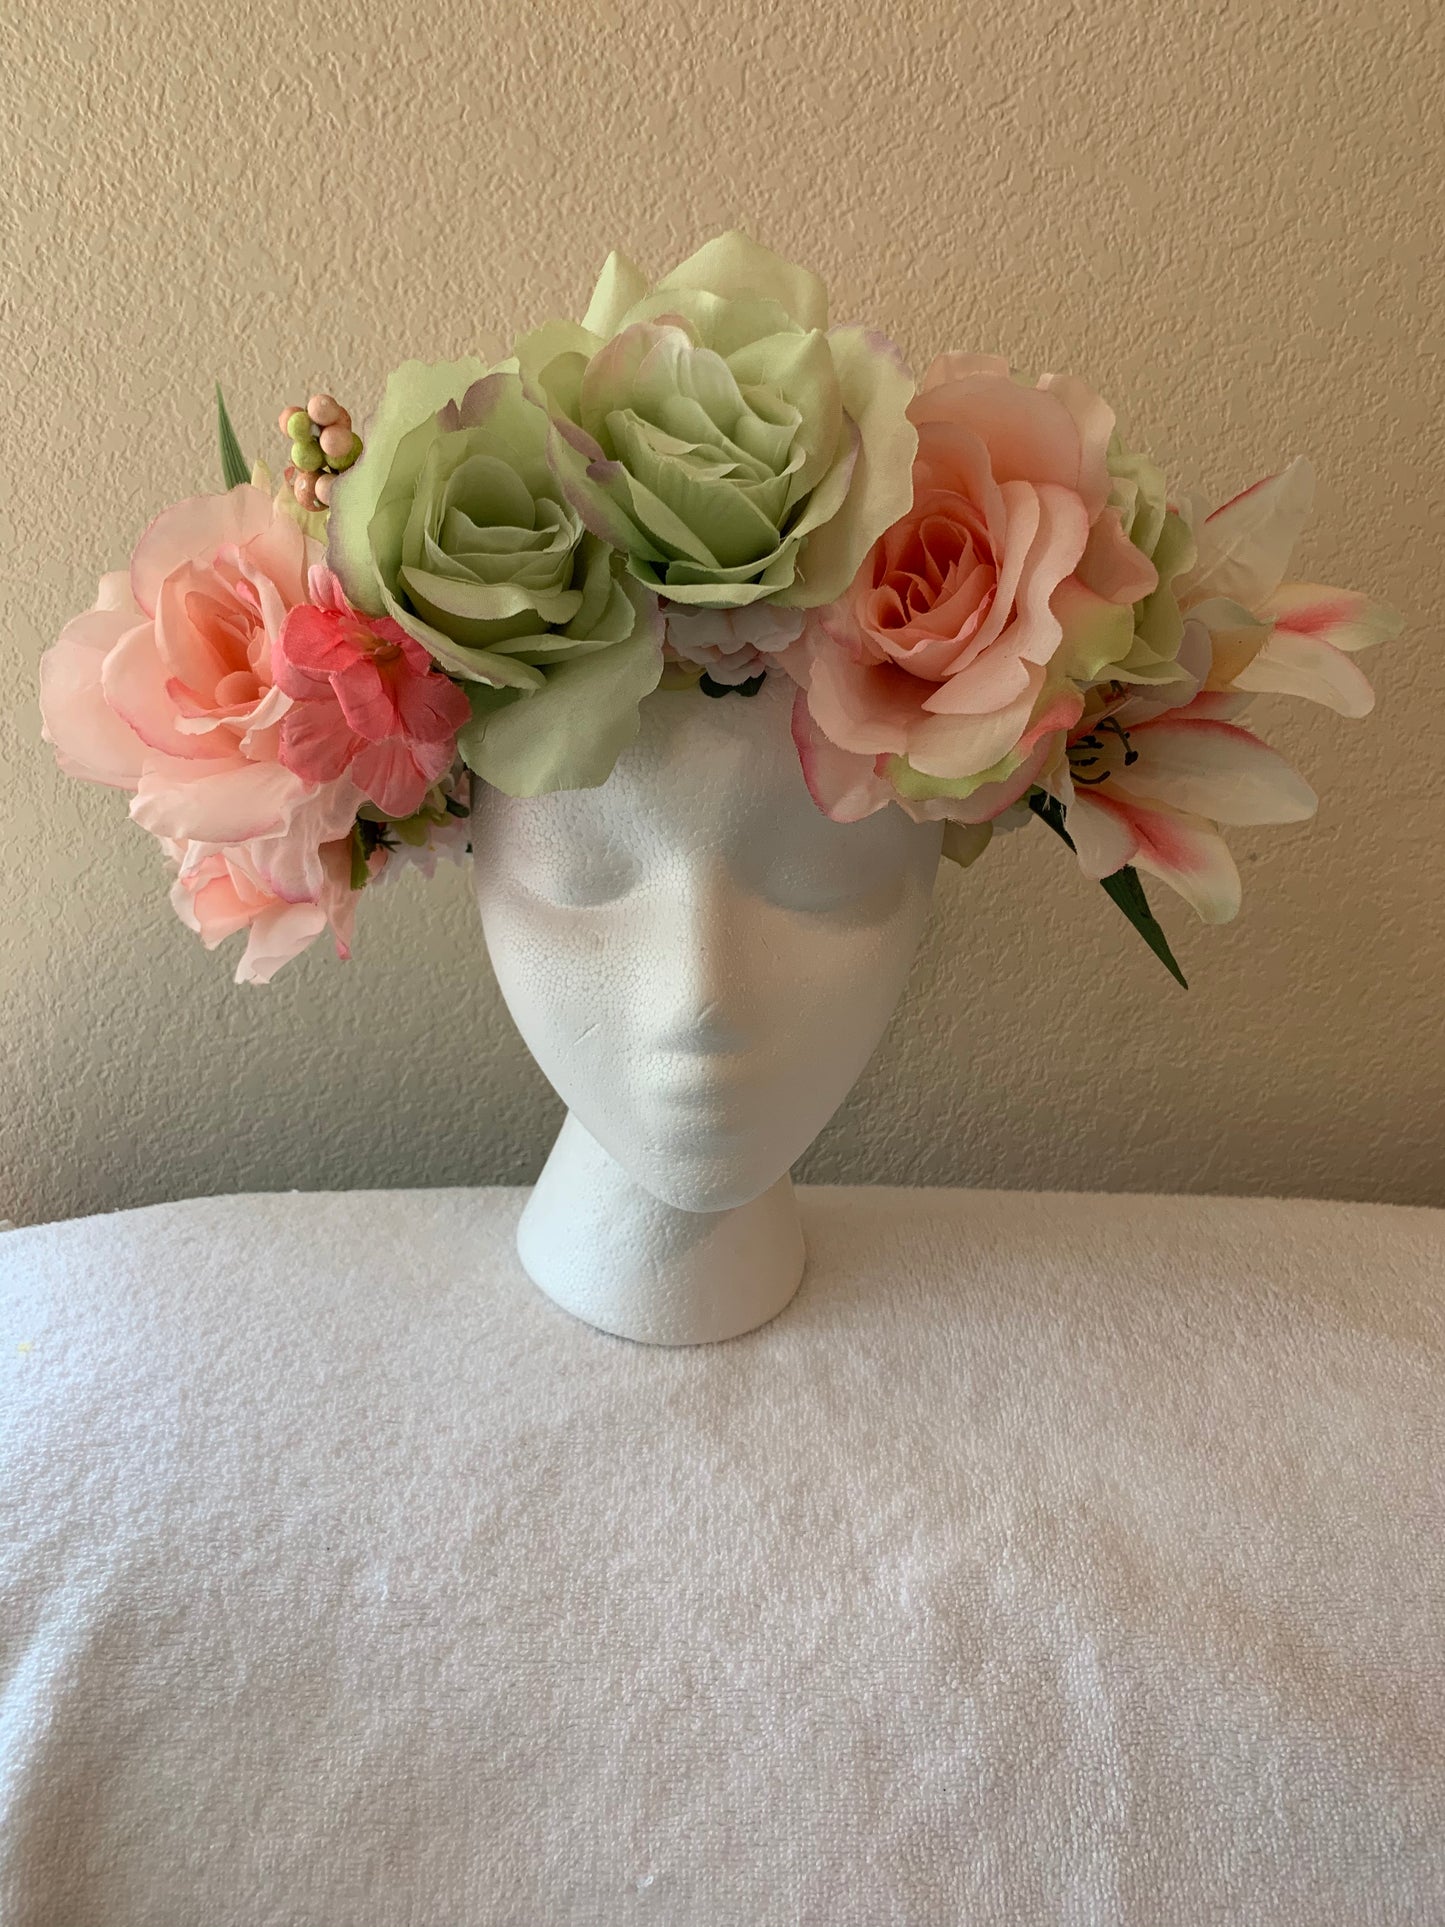 Large Wreath - Pale Pink and Green Flowers